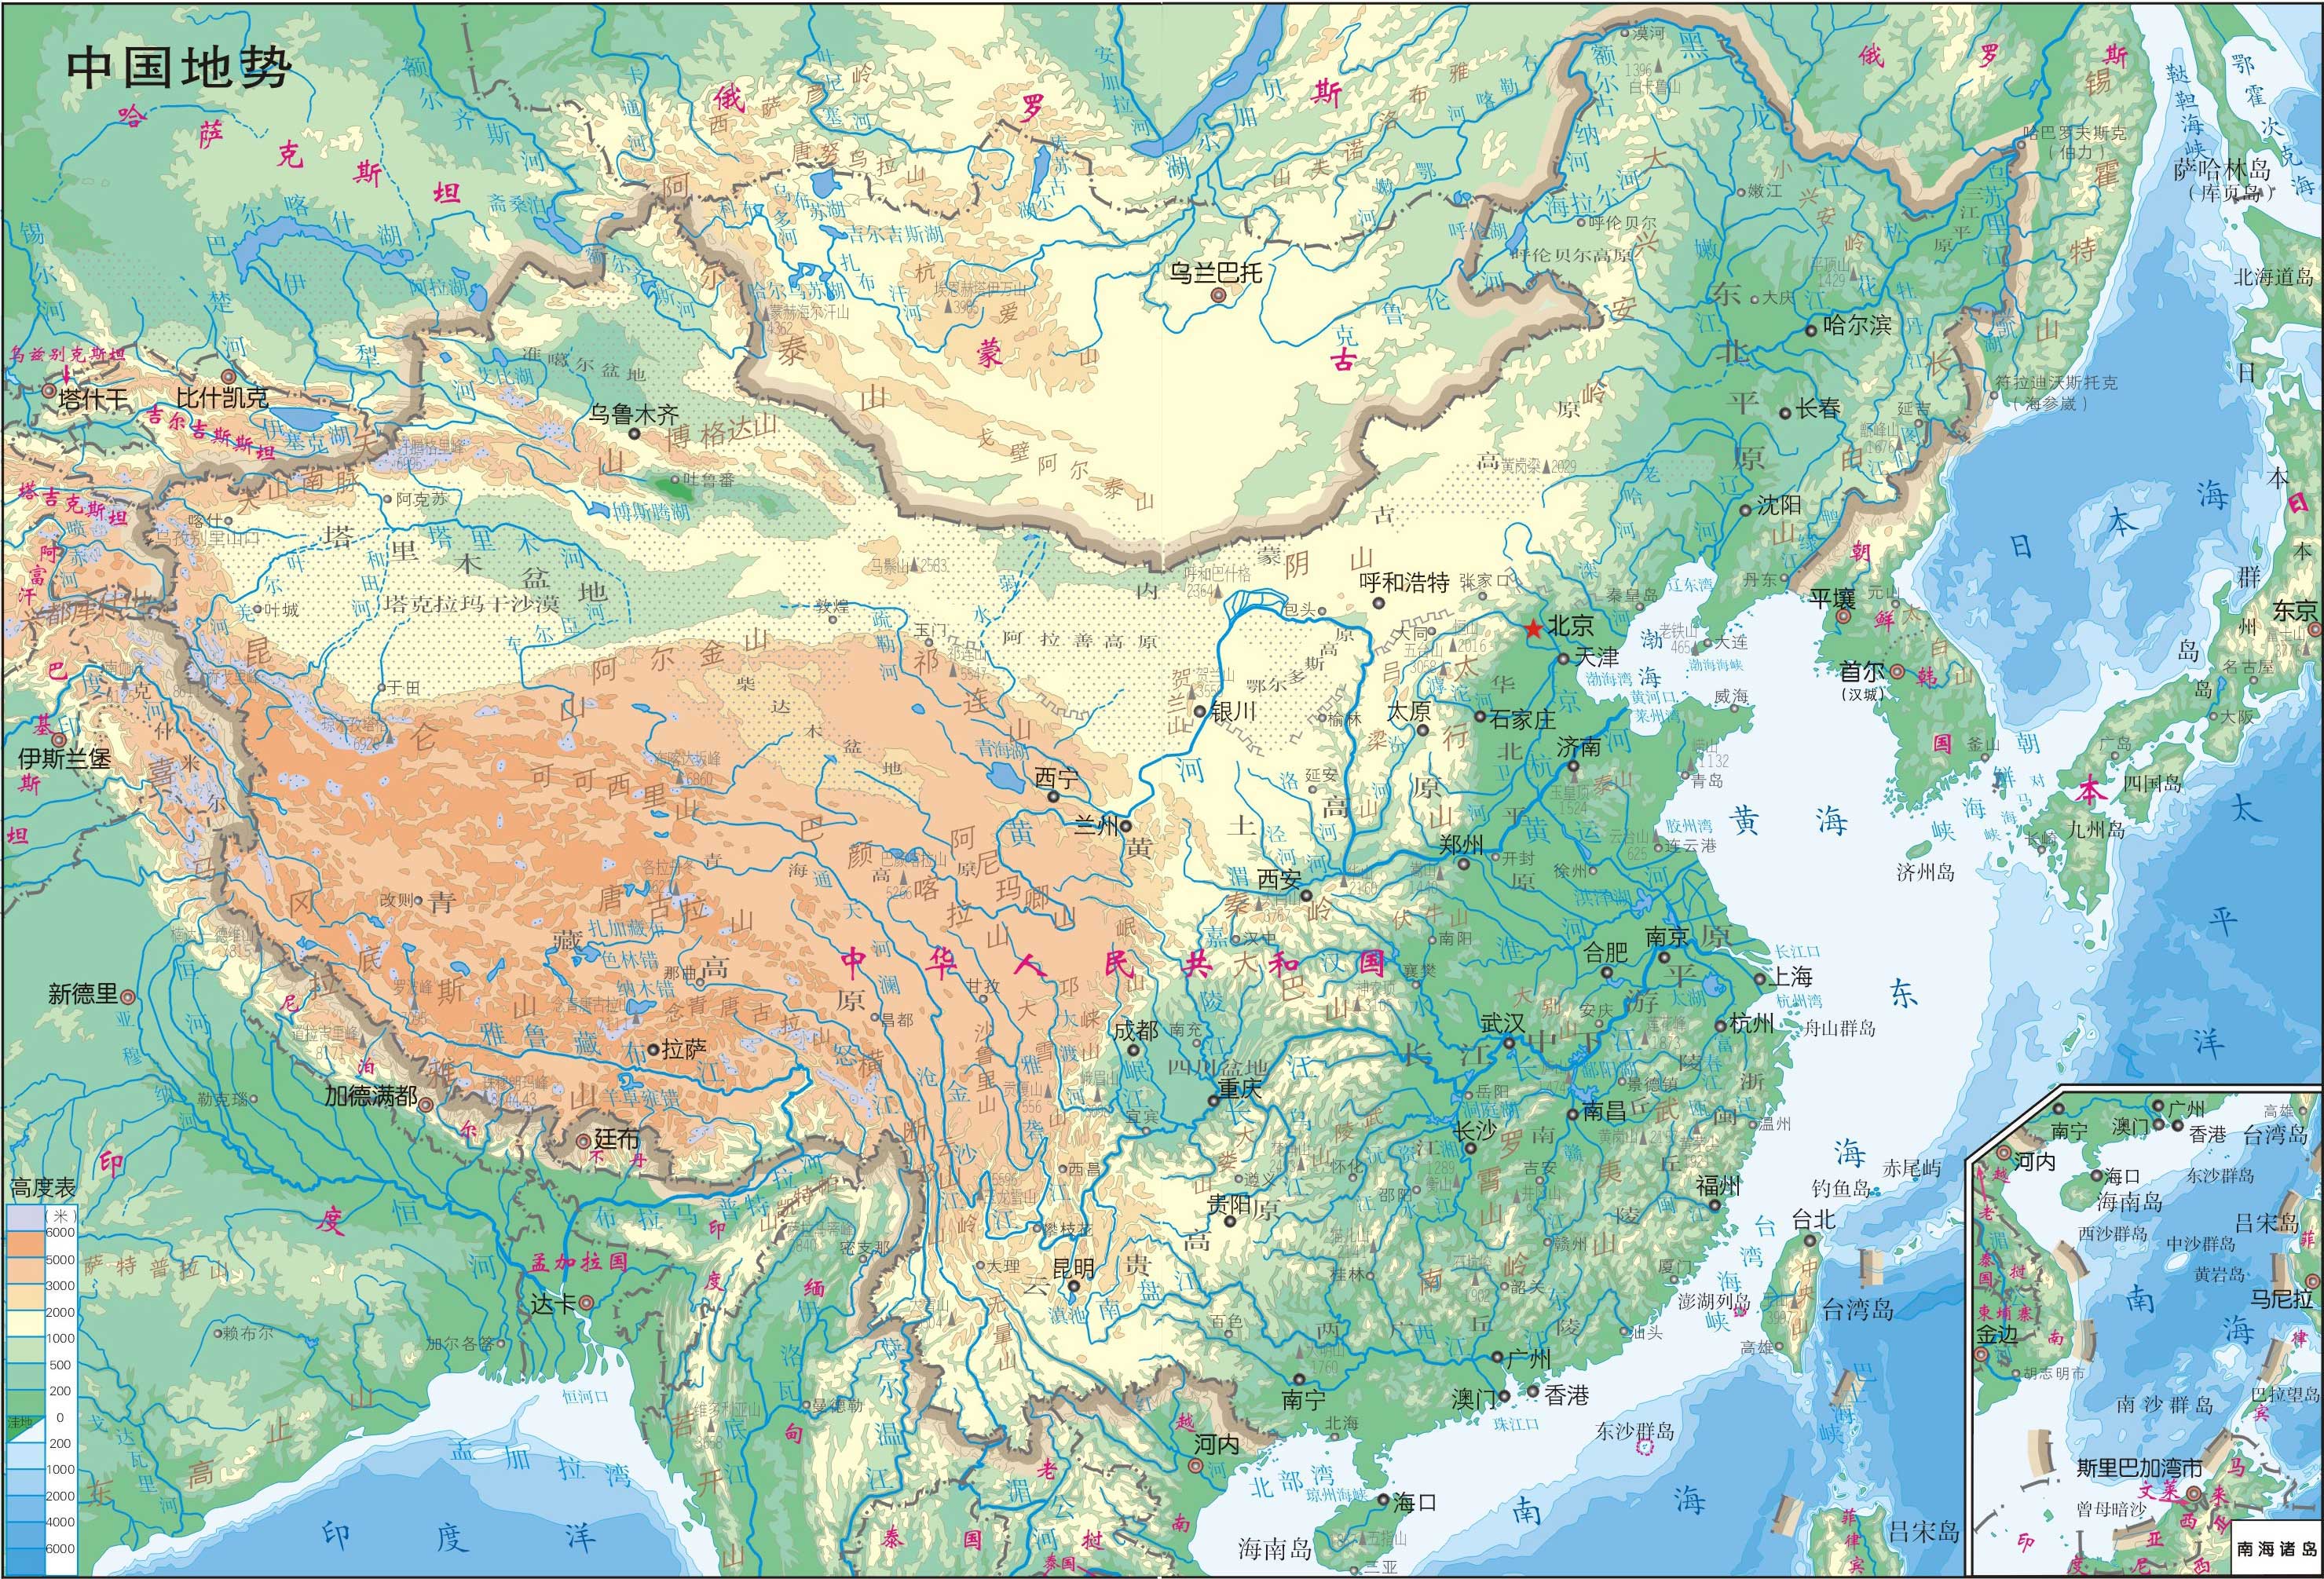 The topography varies greatly in China, a vast land of lofty plateau,